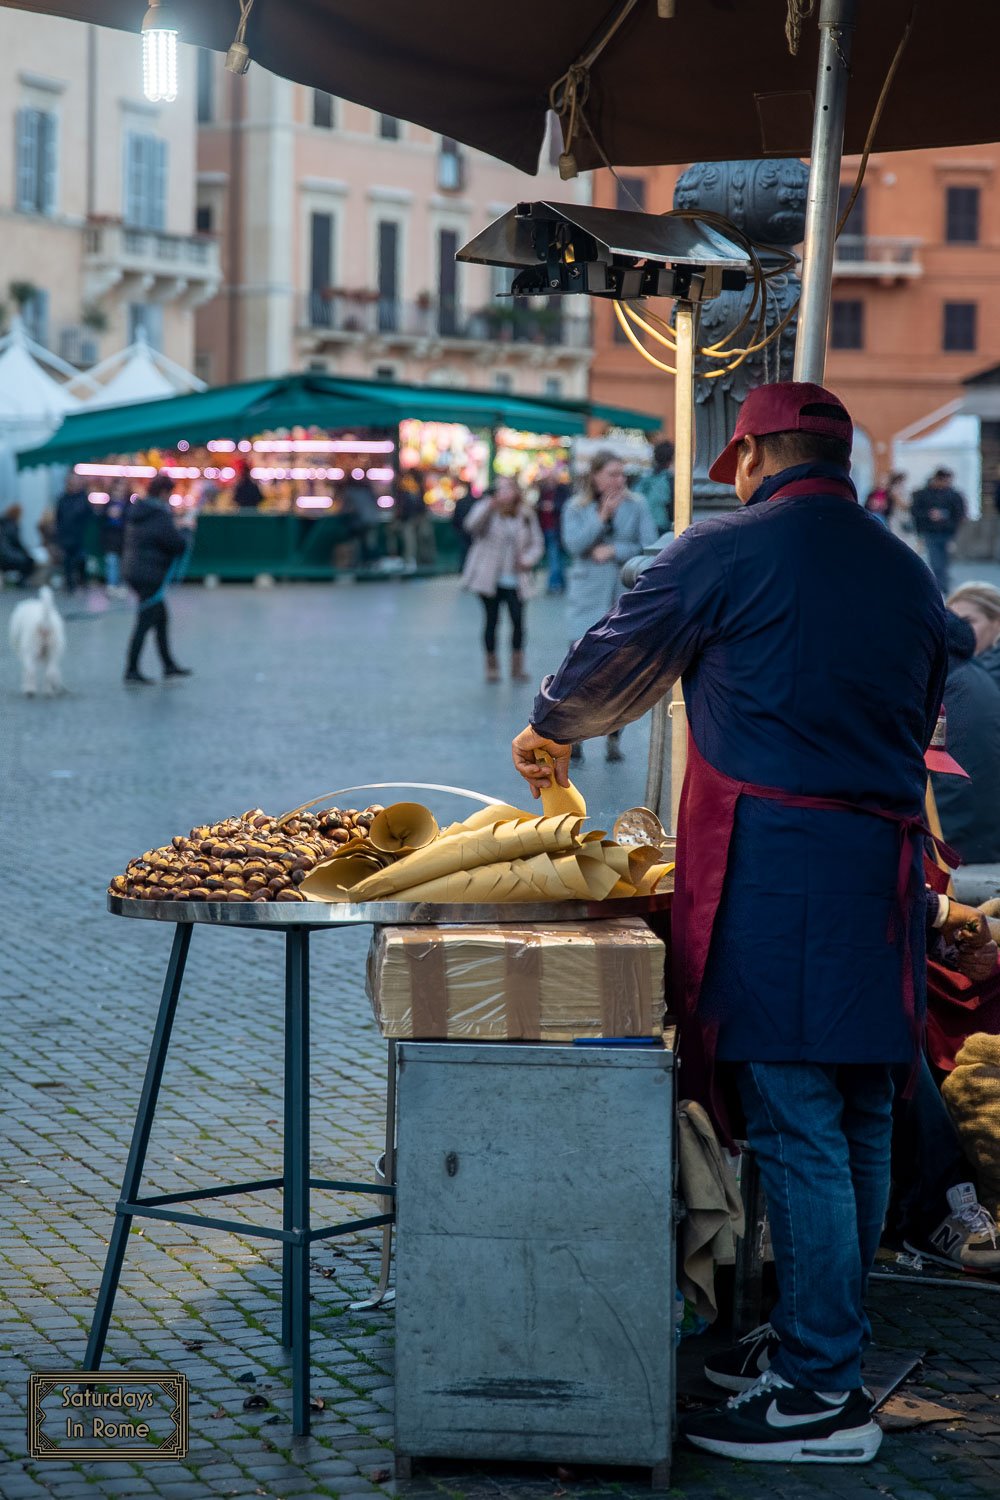 Christmas Market and Feast of the Befana in Piazza Navona